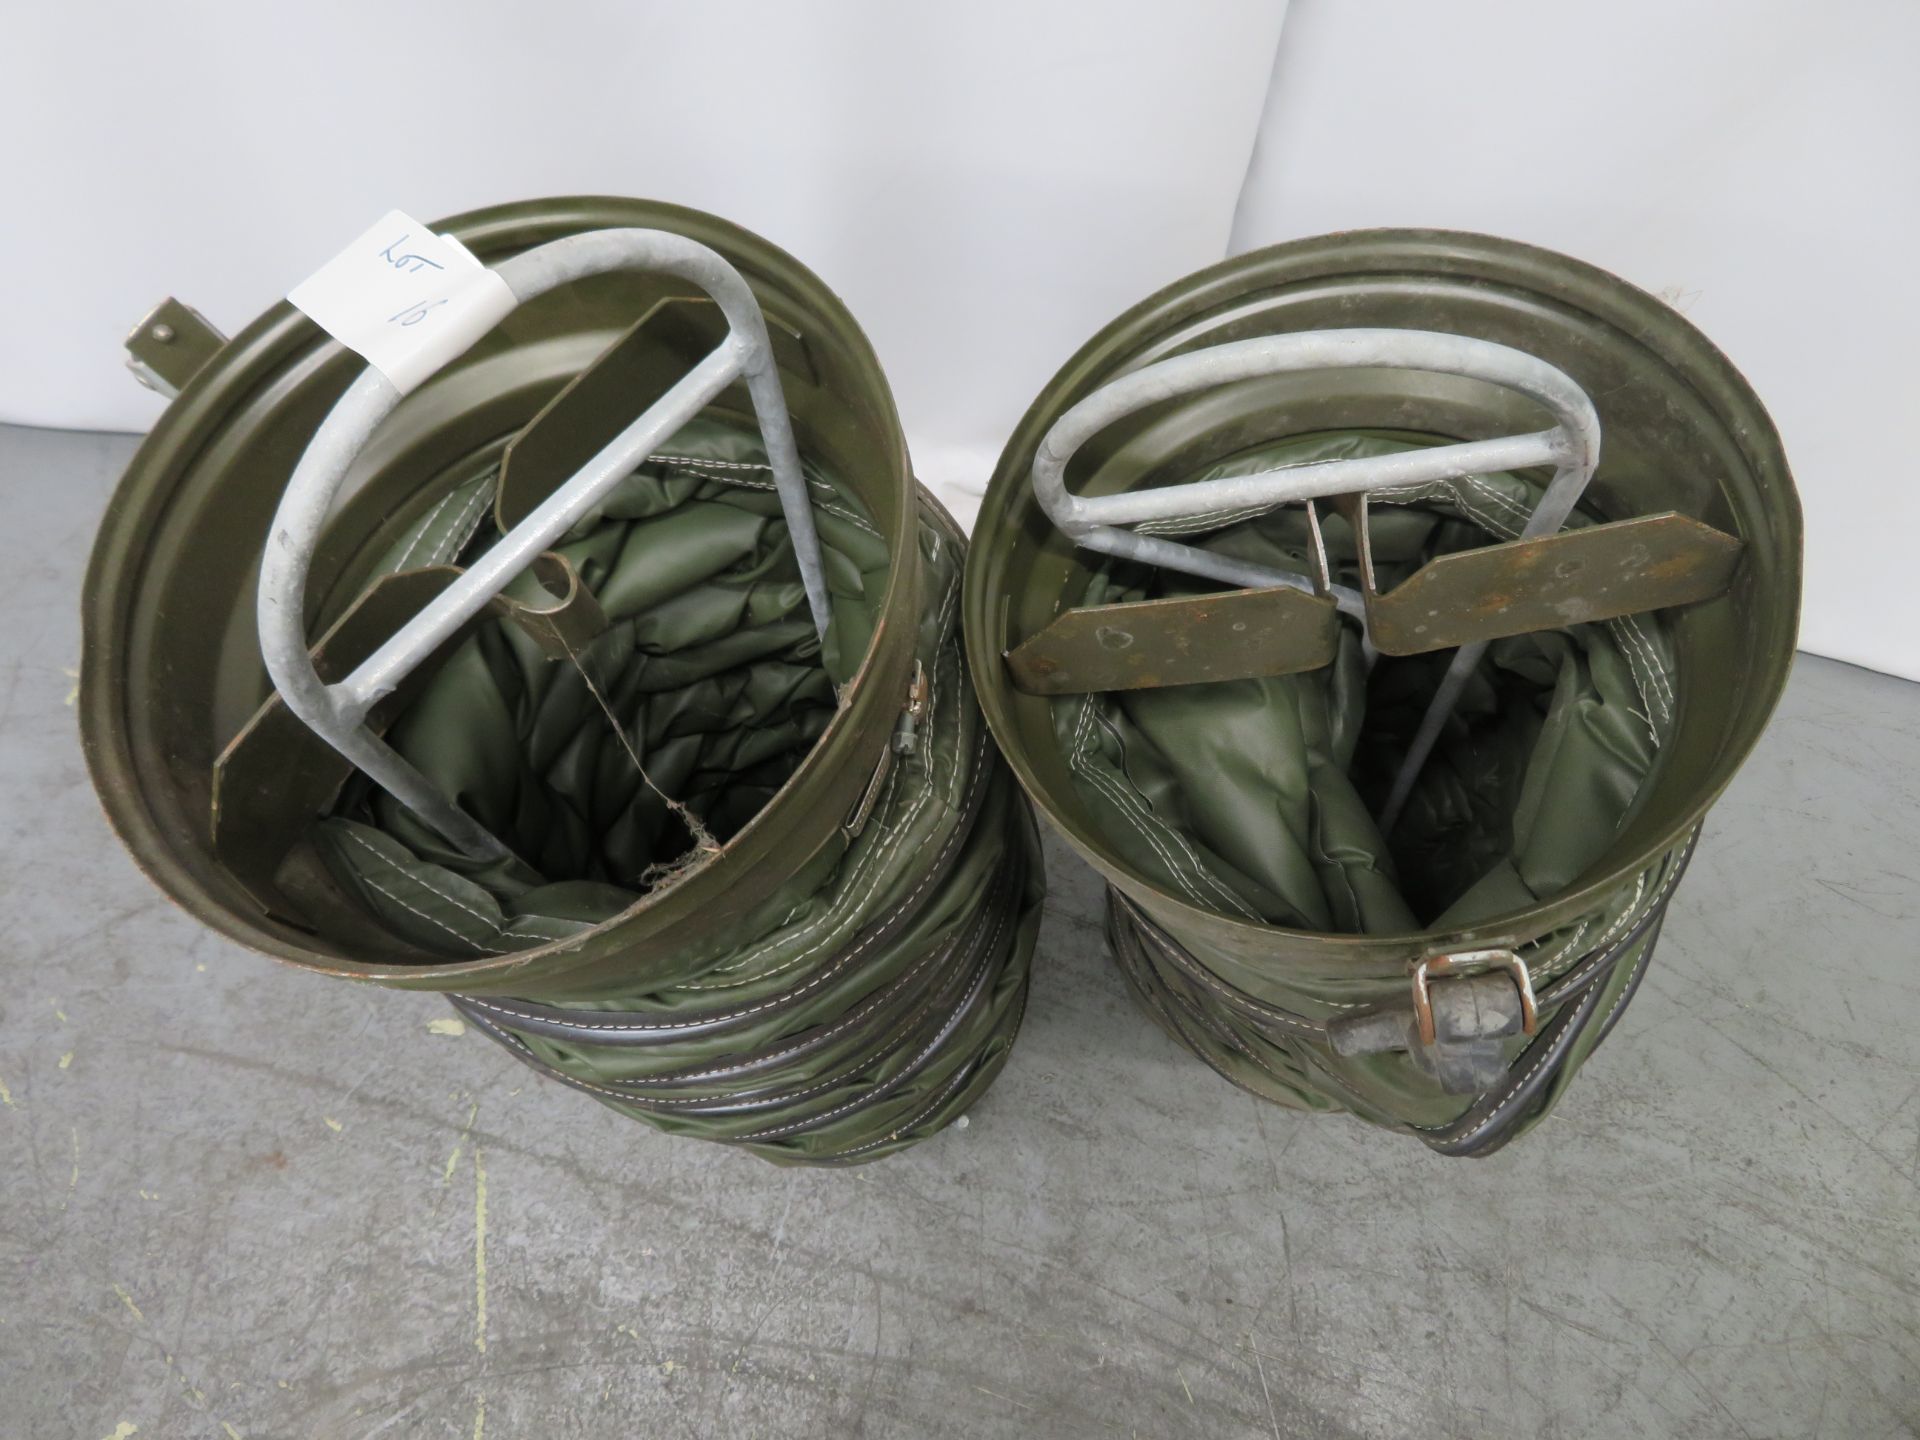 2x Dantherm VA-M 40 Flexible Ducting. Length Approx 3m. - Image 3 of 4